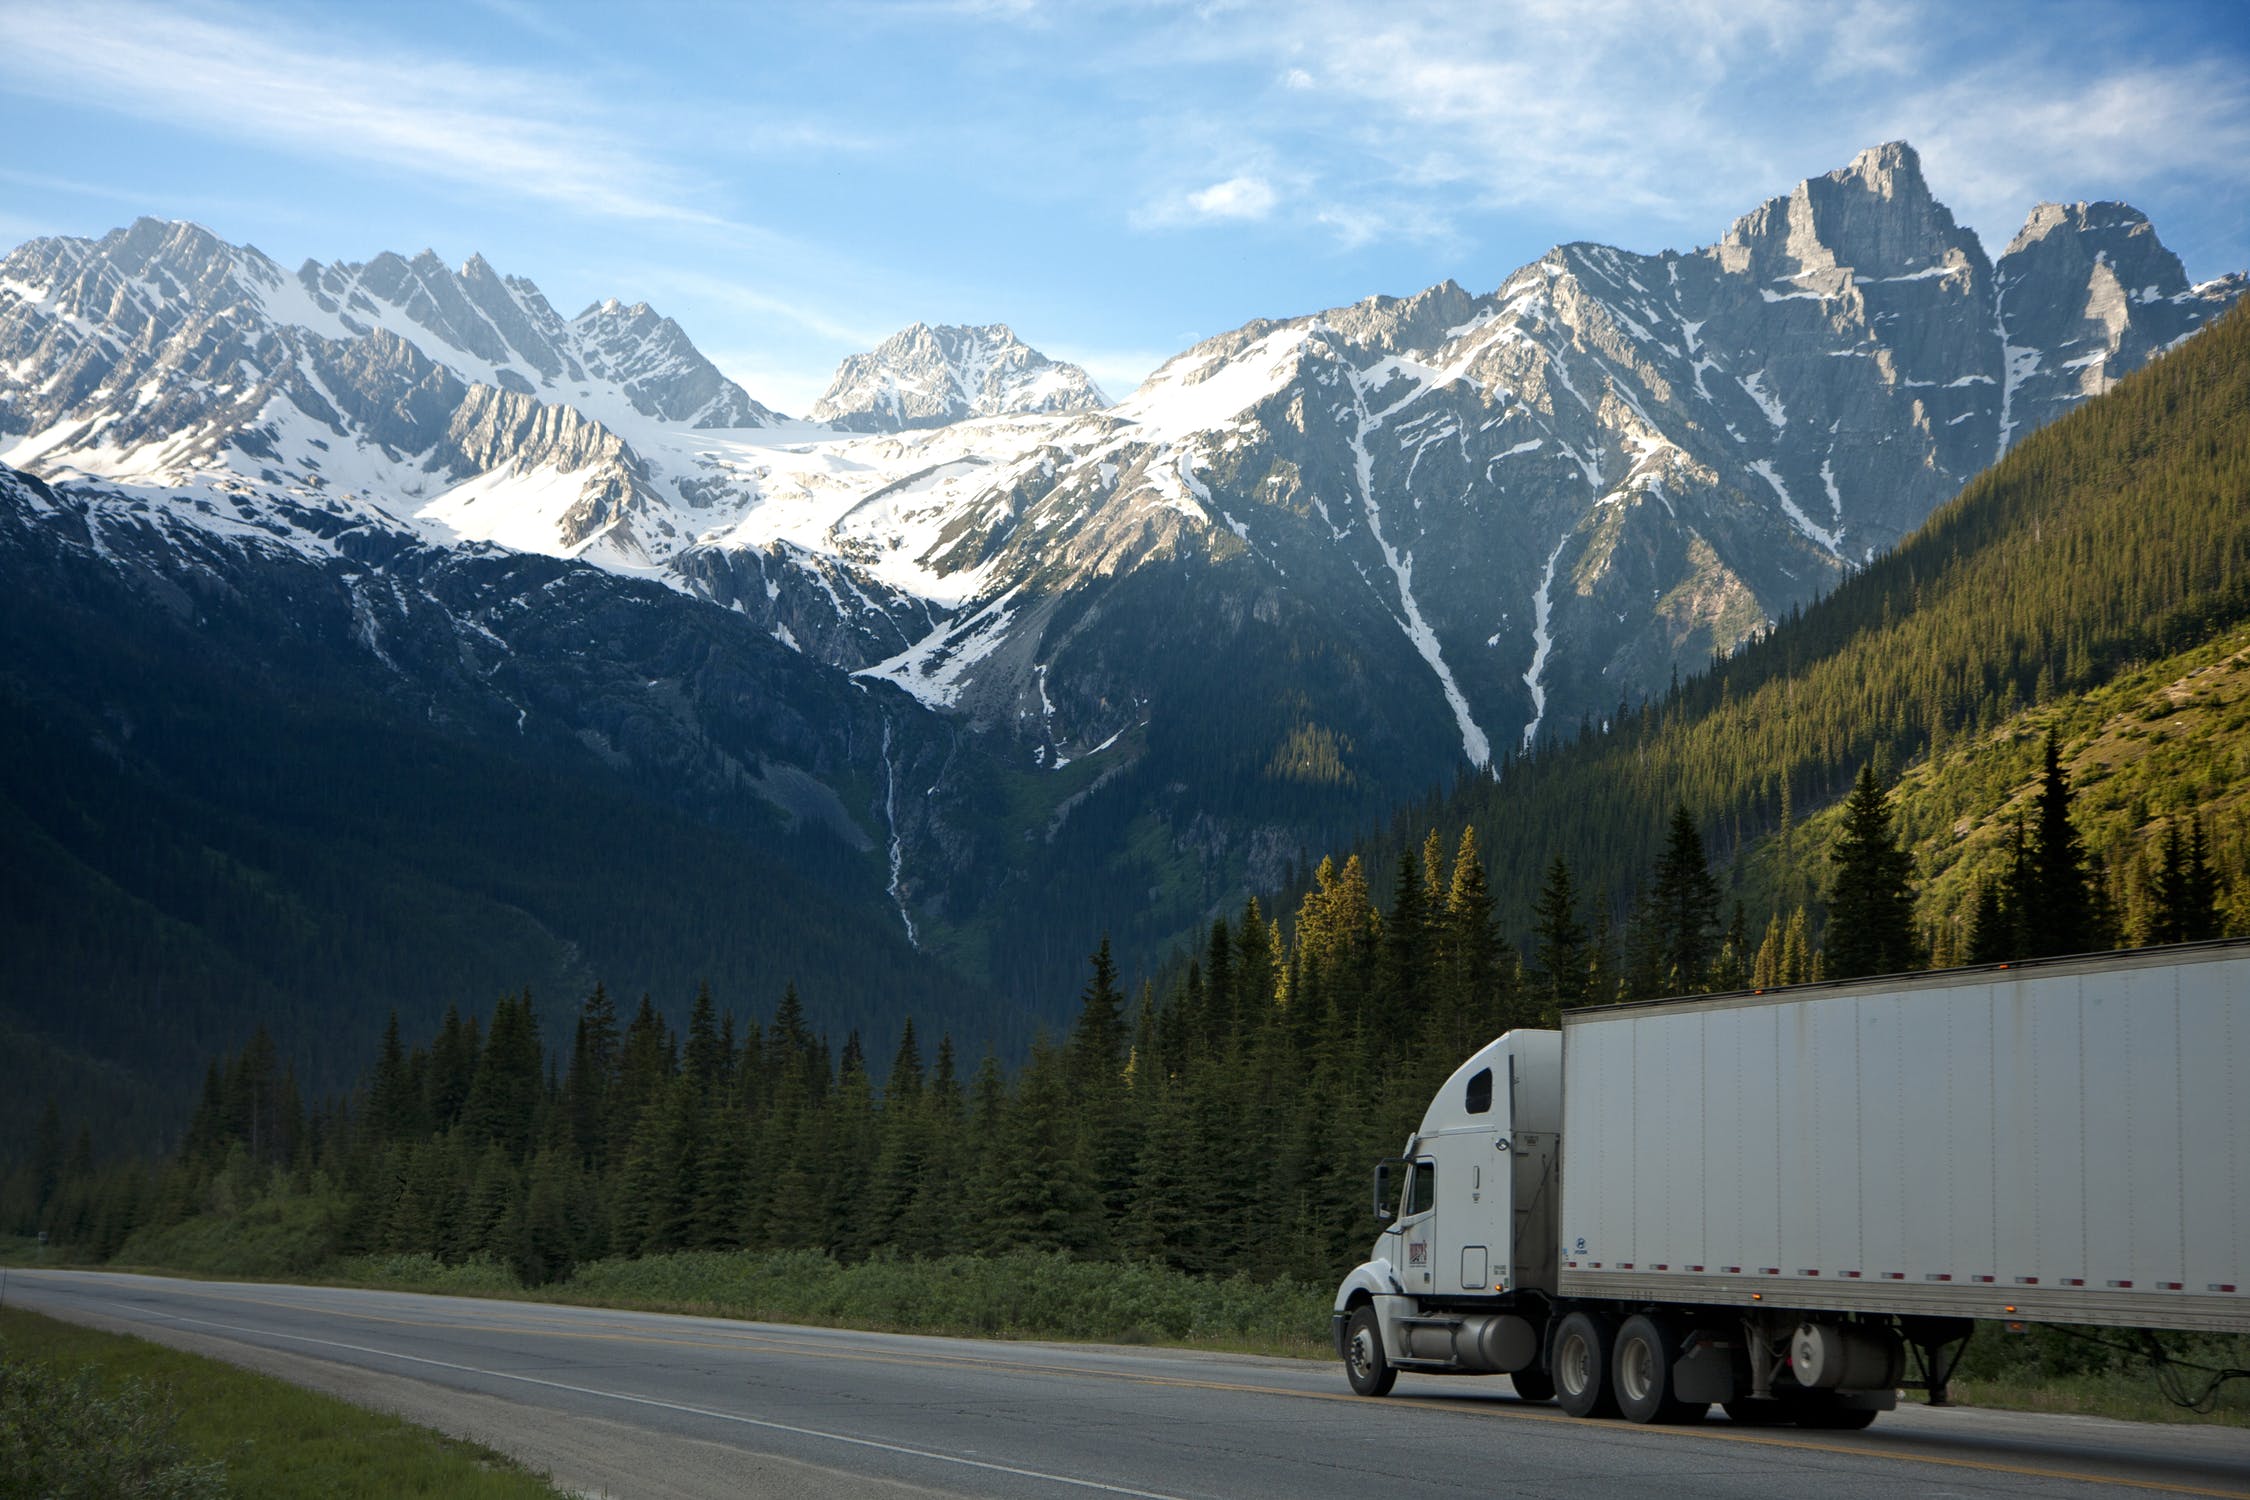 Truck in Mountains | Customs Clearance World